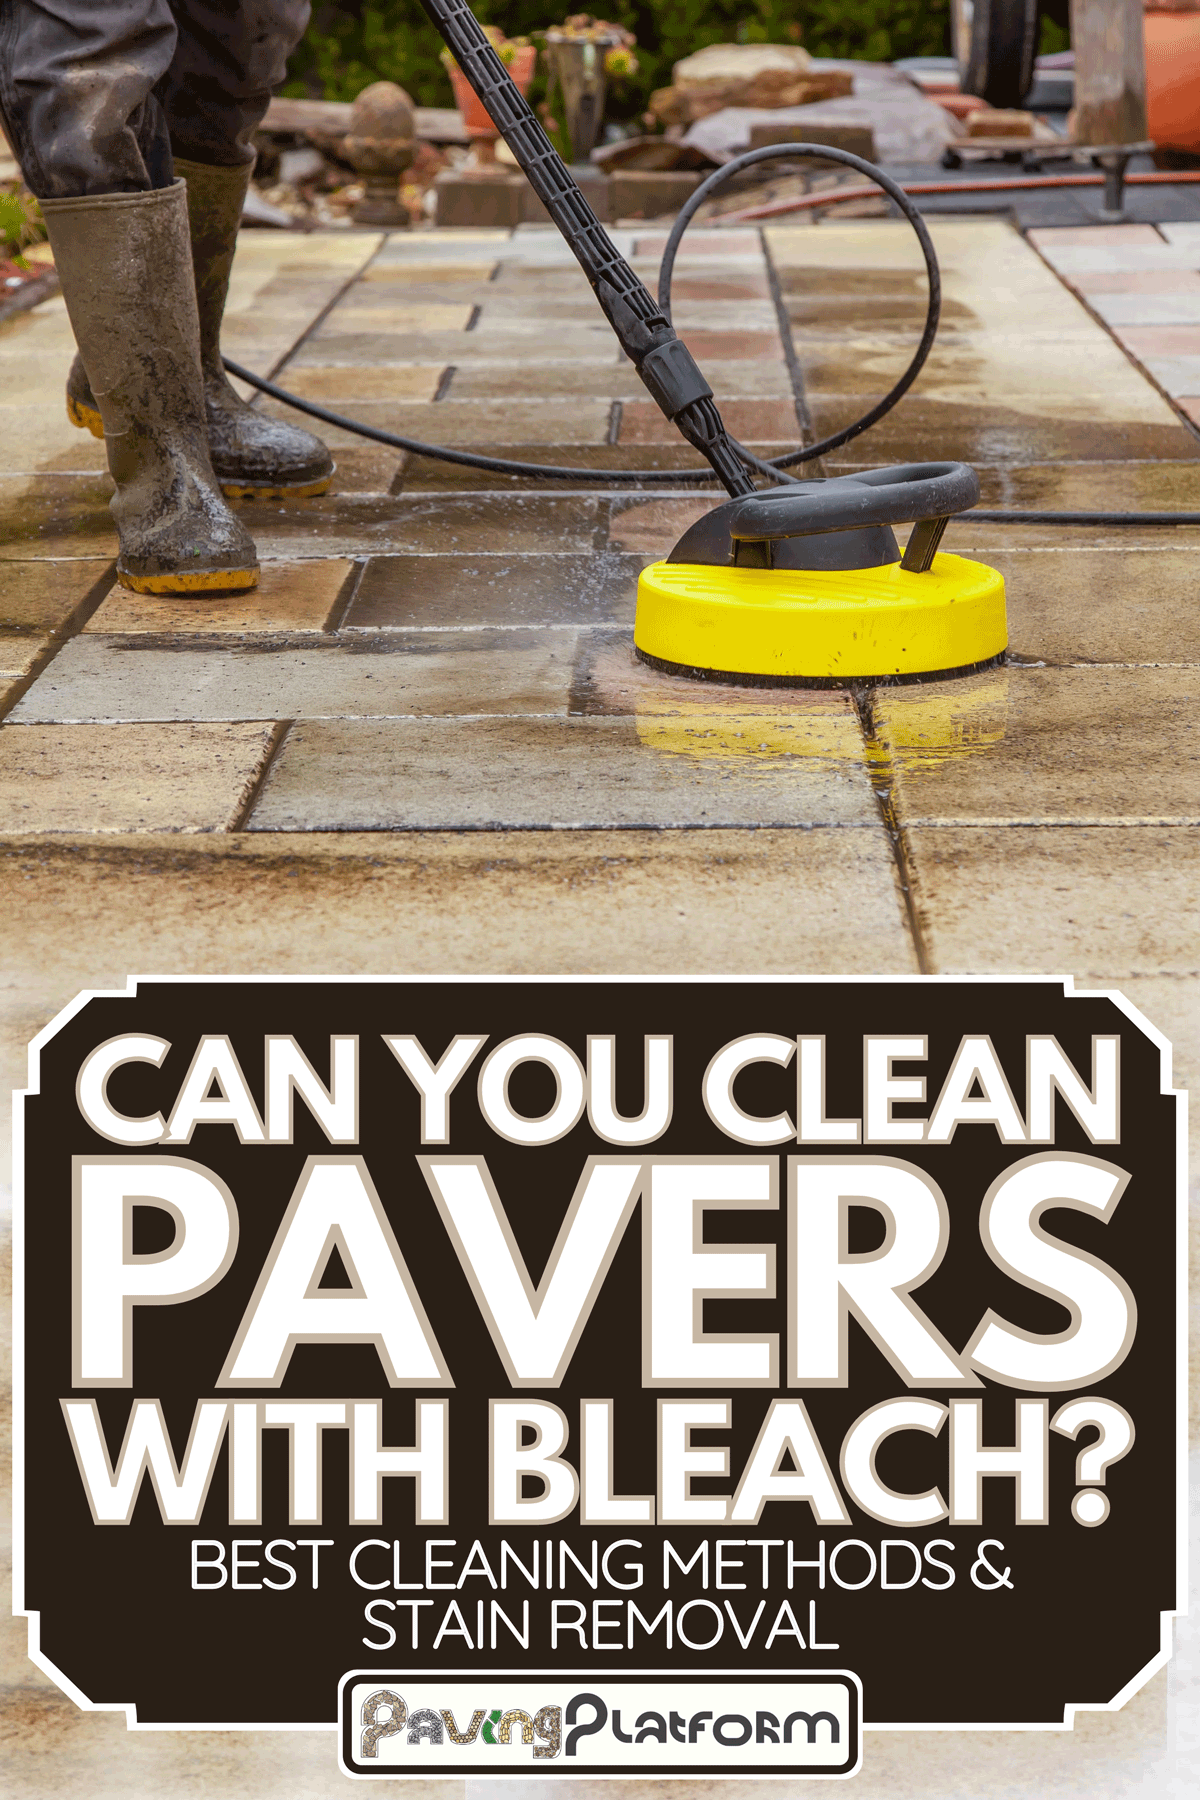 Worker cleaning the outdoors floor, Can You Clean Pavers With Bleach? [Best Cleaning Methods & Stain Removal]